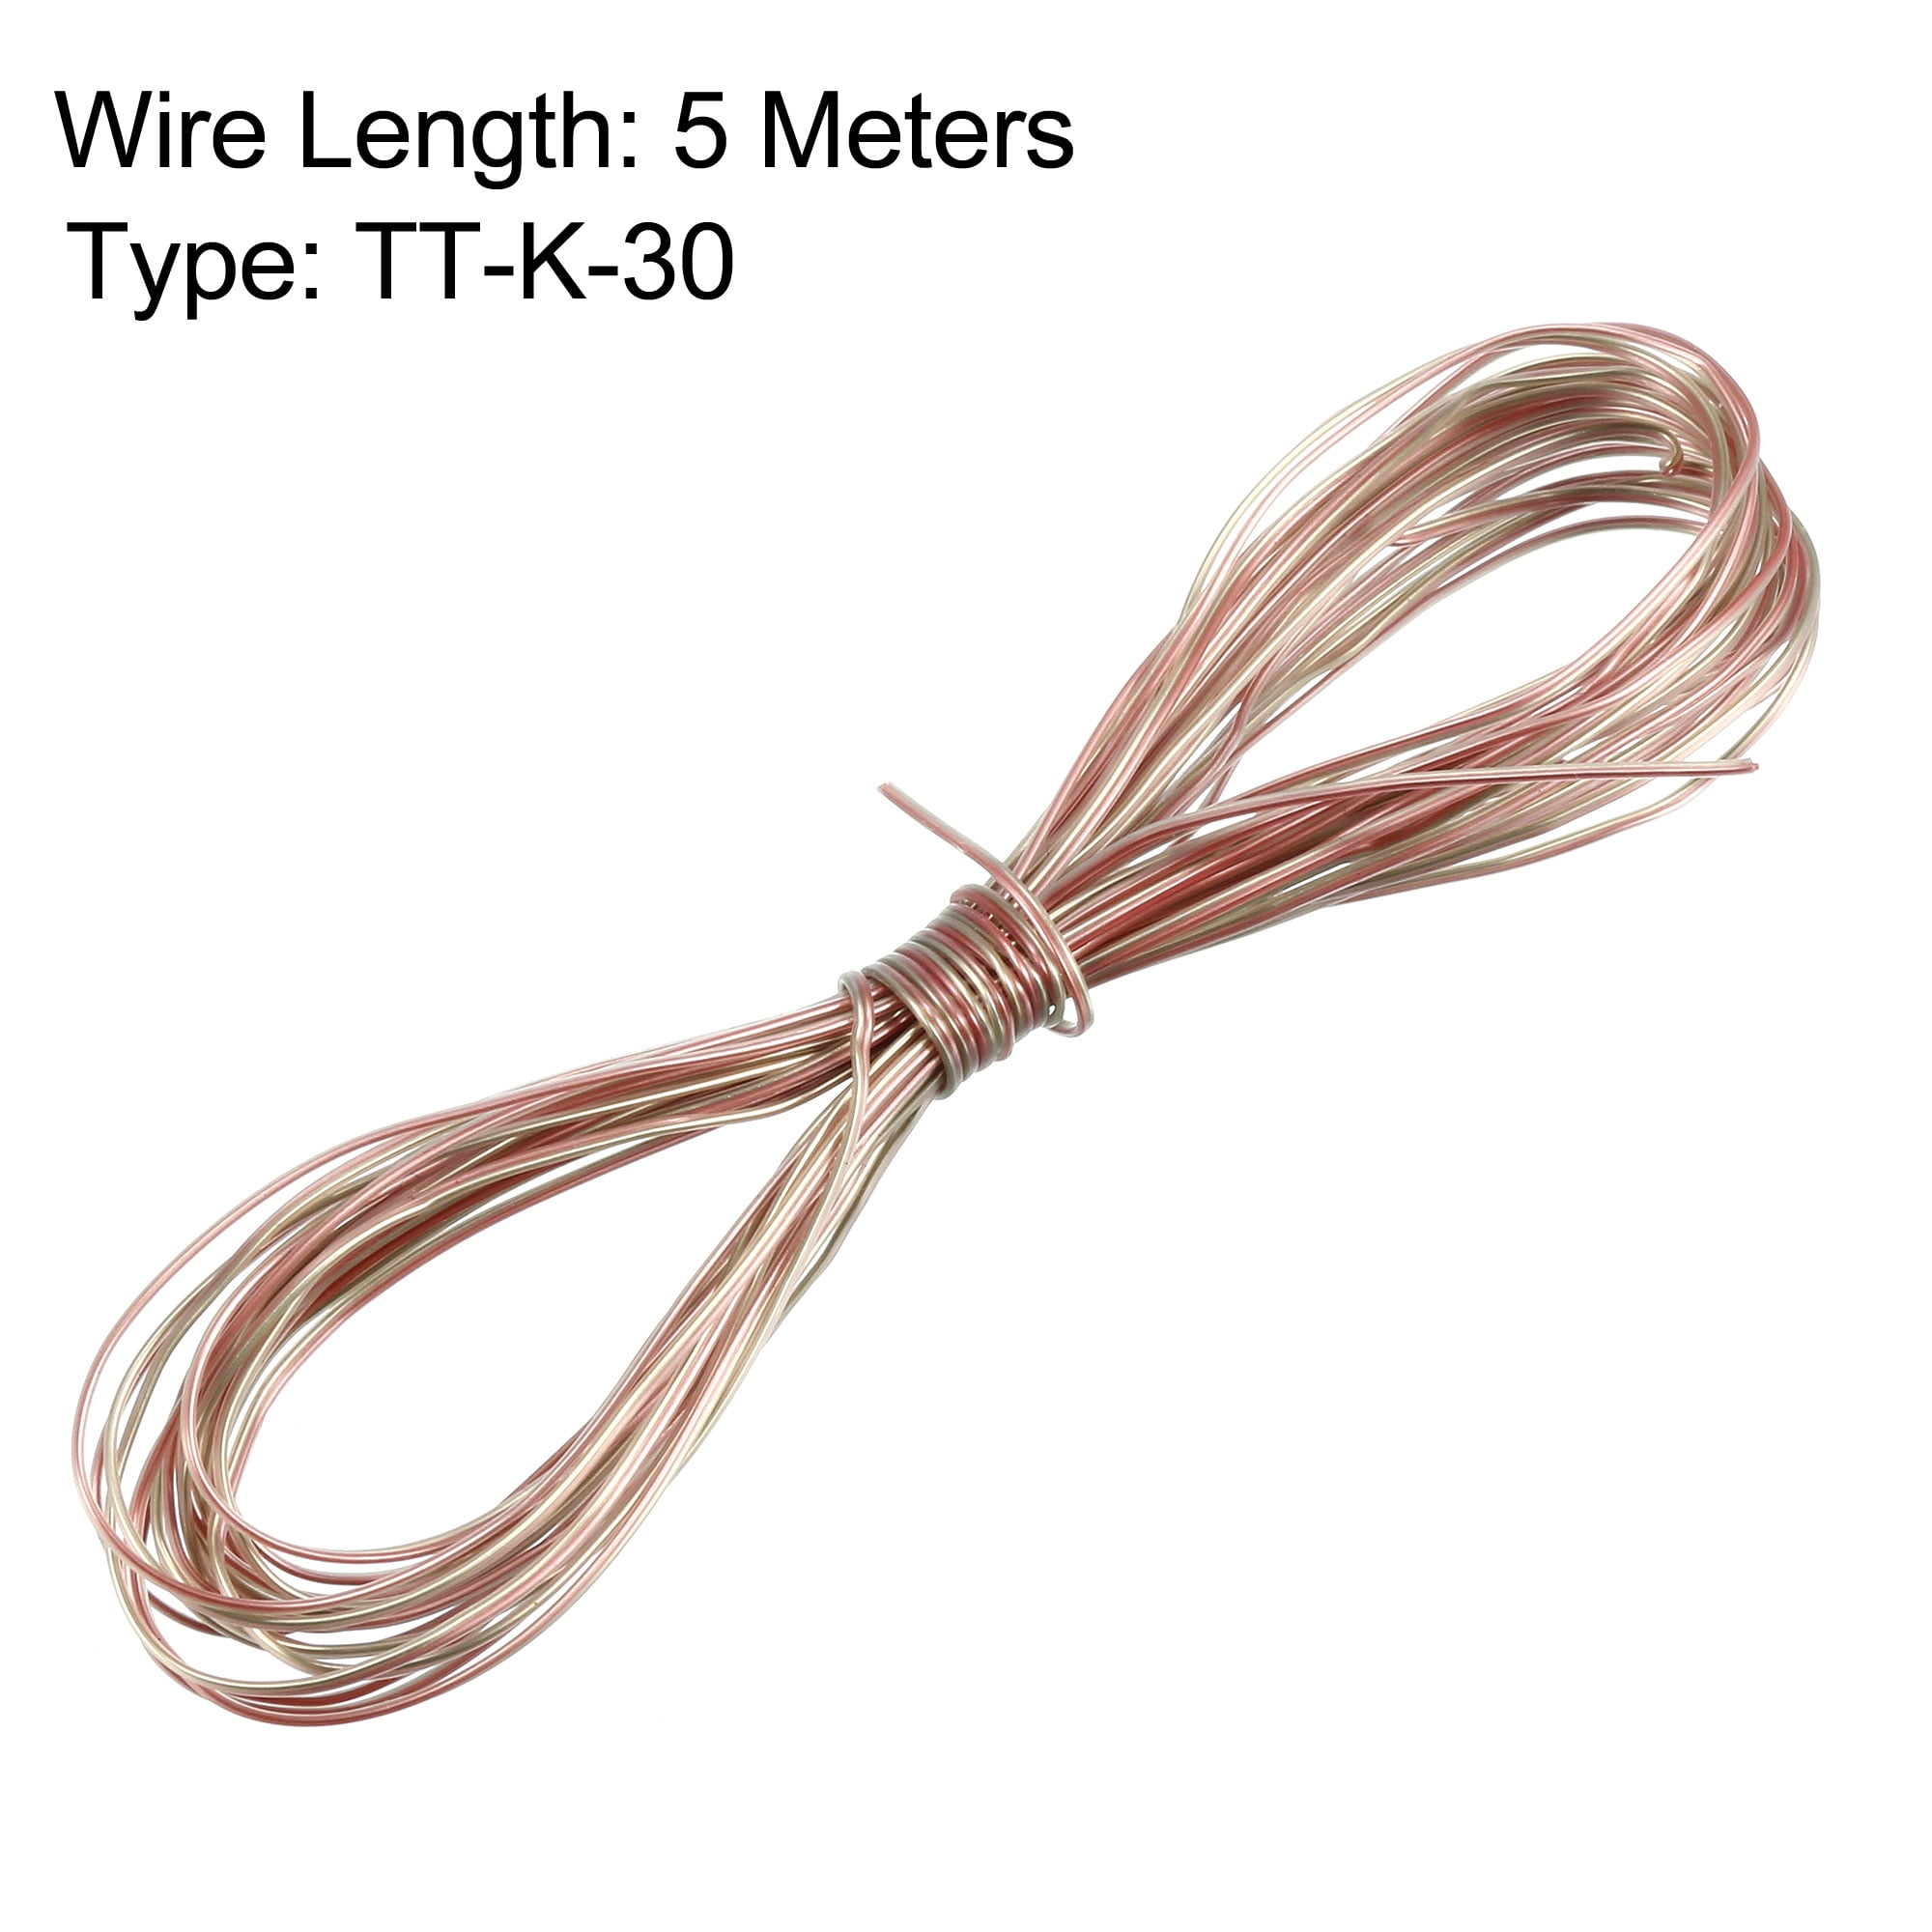 TT-K-30 Thermocouple Wire PTFE Extension Thin Wire 5 Meters 